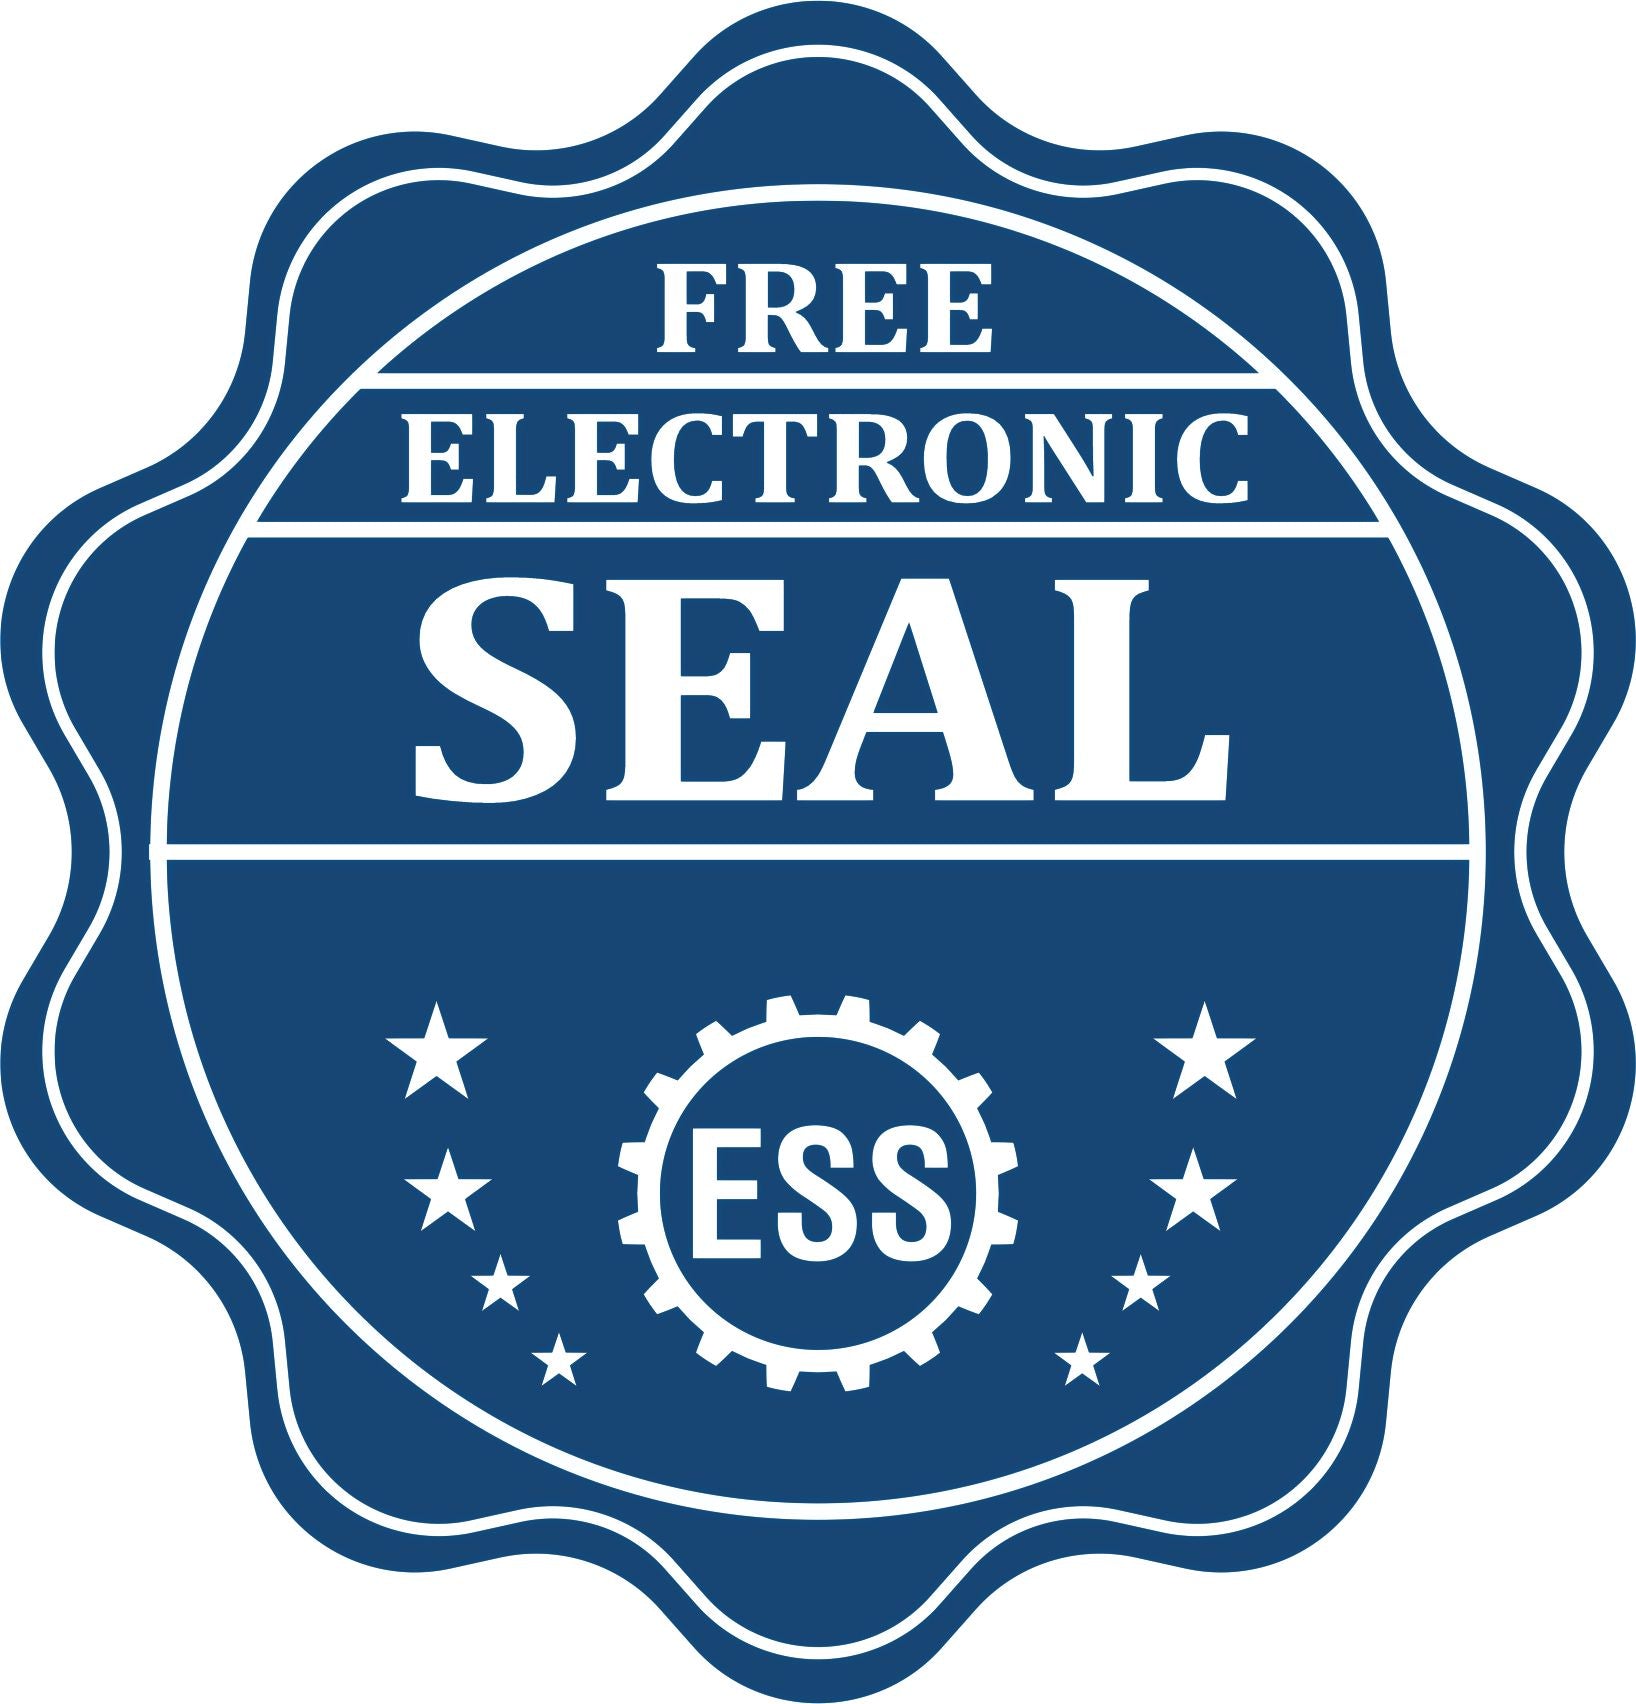 A badge showing a free electronic seal for the Handheld Hawaii Professional Engineer Embosser with stars and the ESS gear on the emblem.